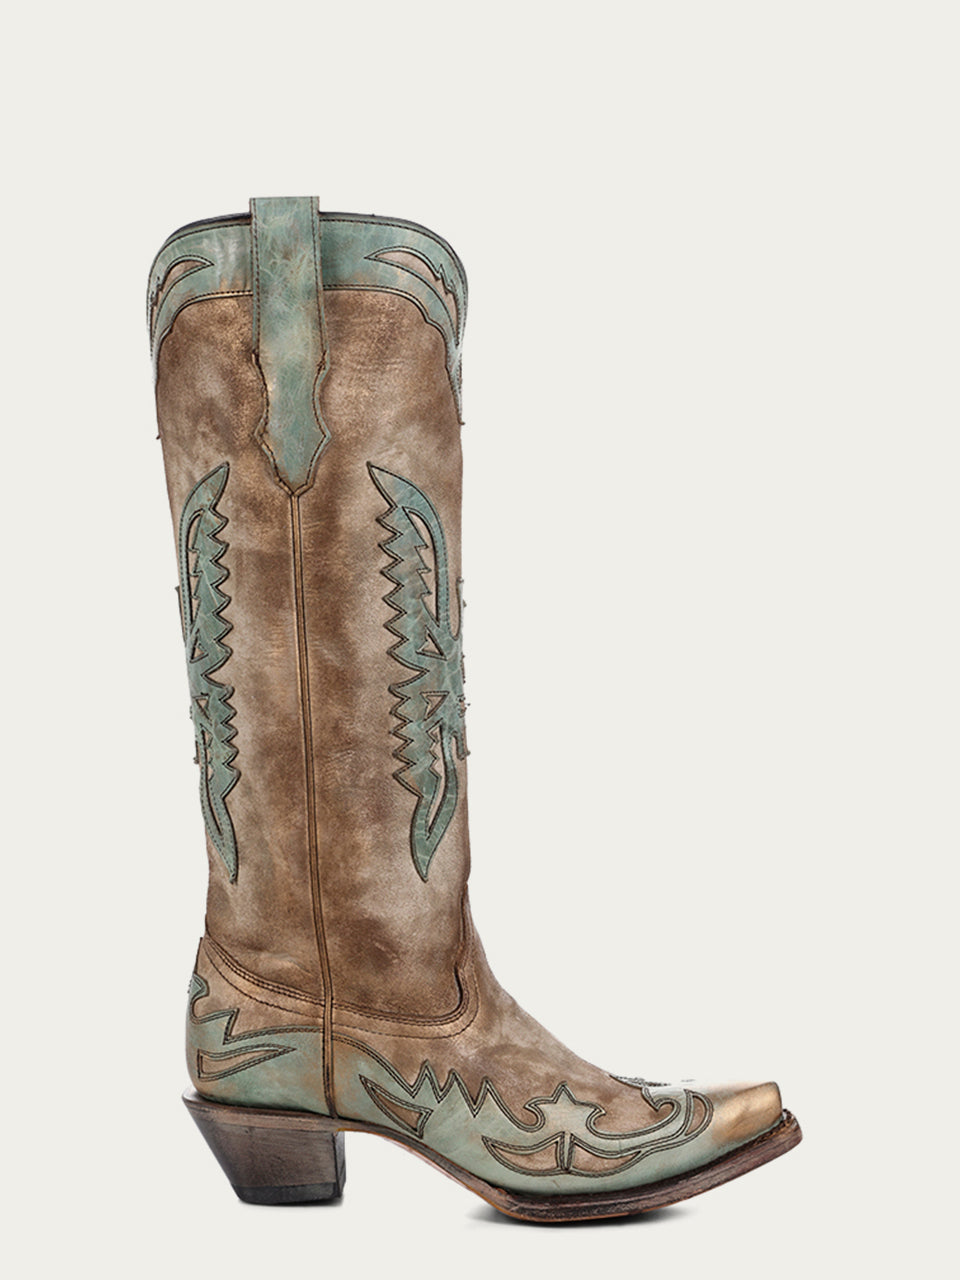 A4302 - WOMEN'S GOAT VINTAGE BONE AND TURQUOISE EAGLE OVERLAY SNIP-TOE COWBOY BOOT